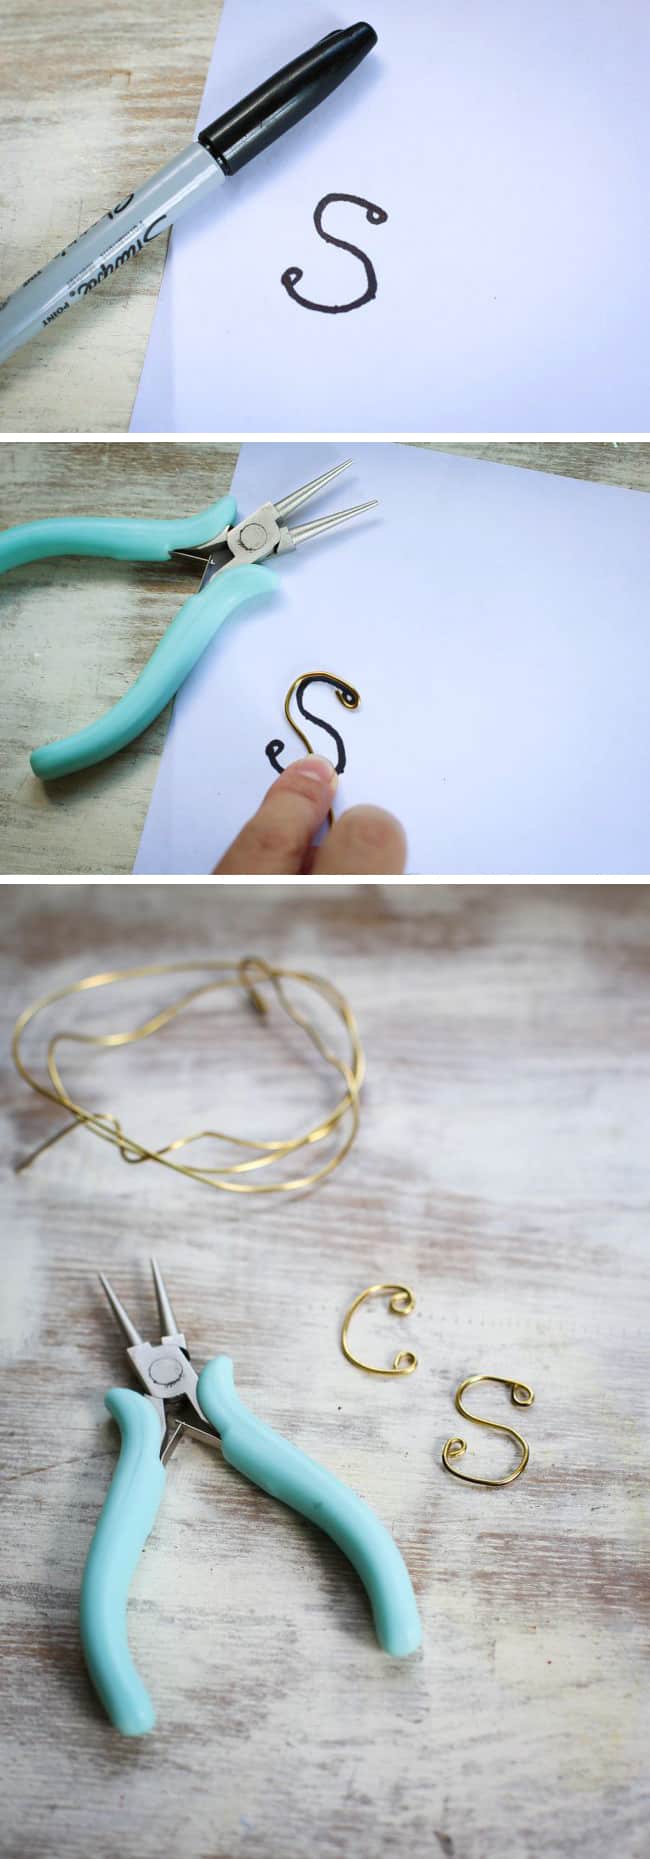 How to make a wire letter